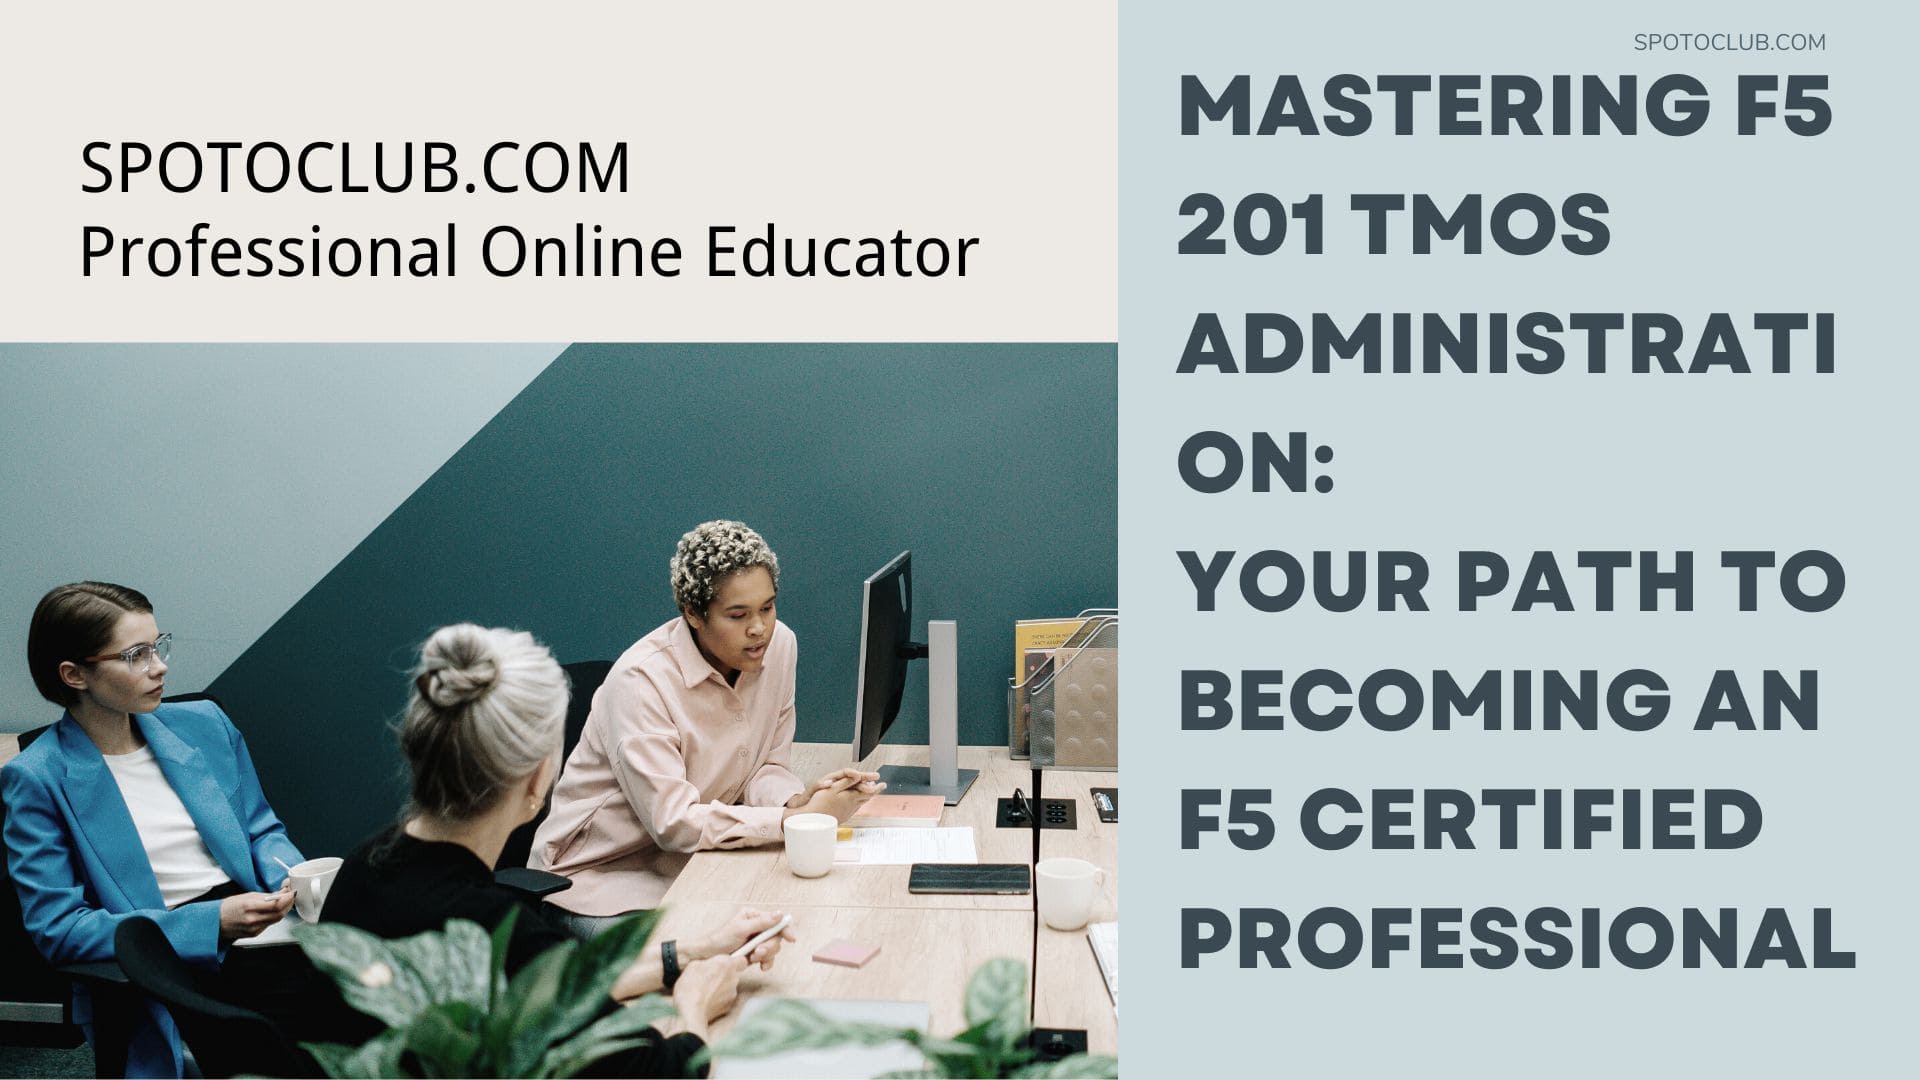 Your Path to Becoming an F5 Certified Professional